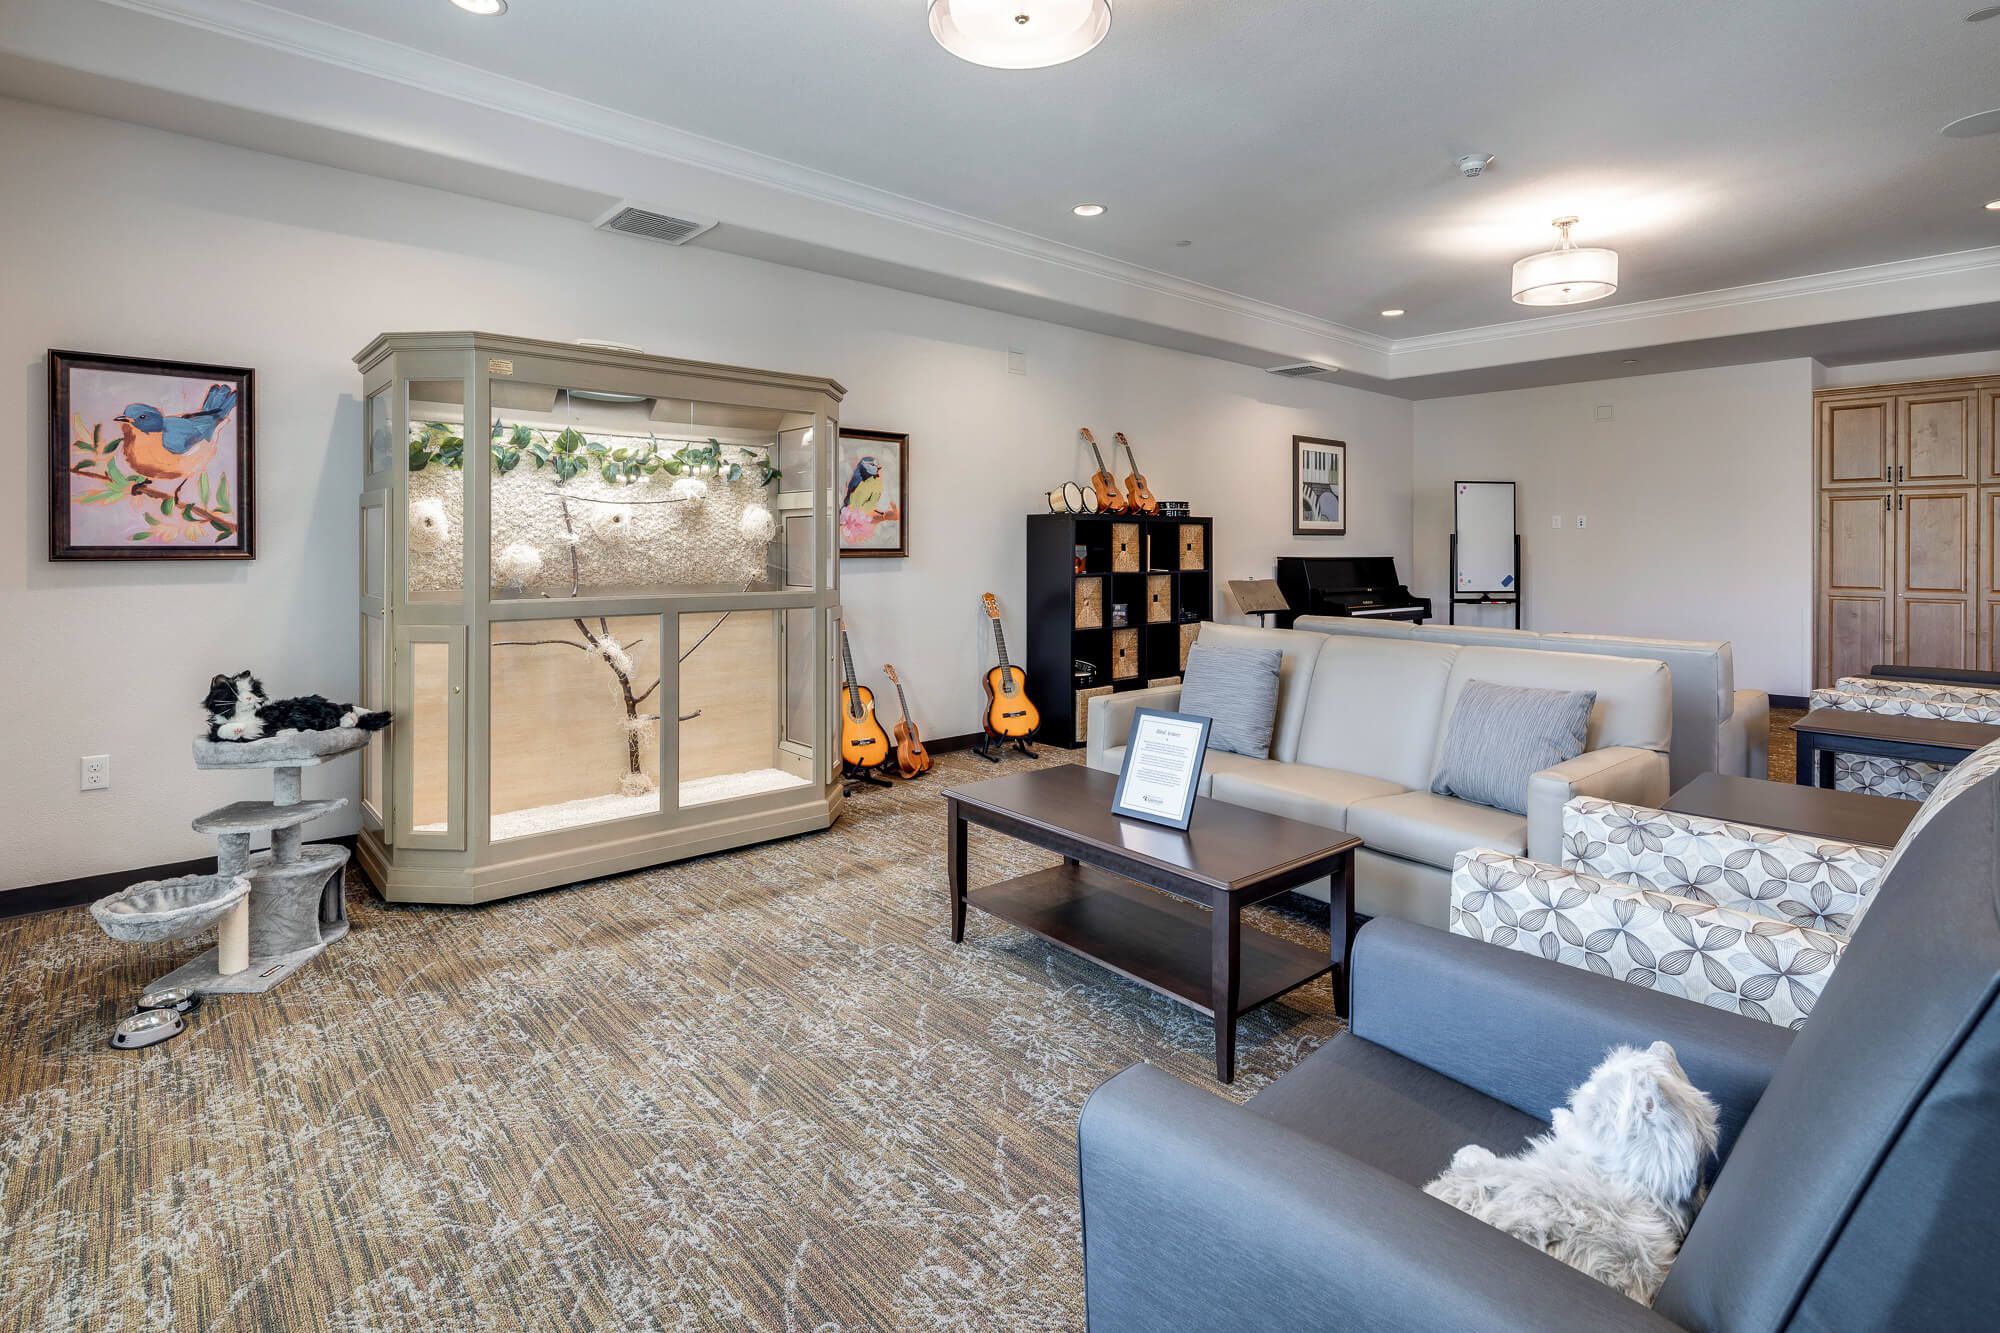 Senior living community at Laurel Heights featuring elegant decor, furniture, pet-friendly living room with a guitar.